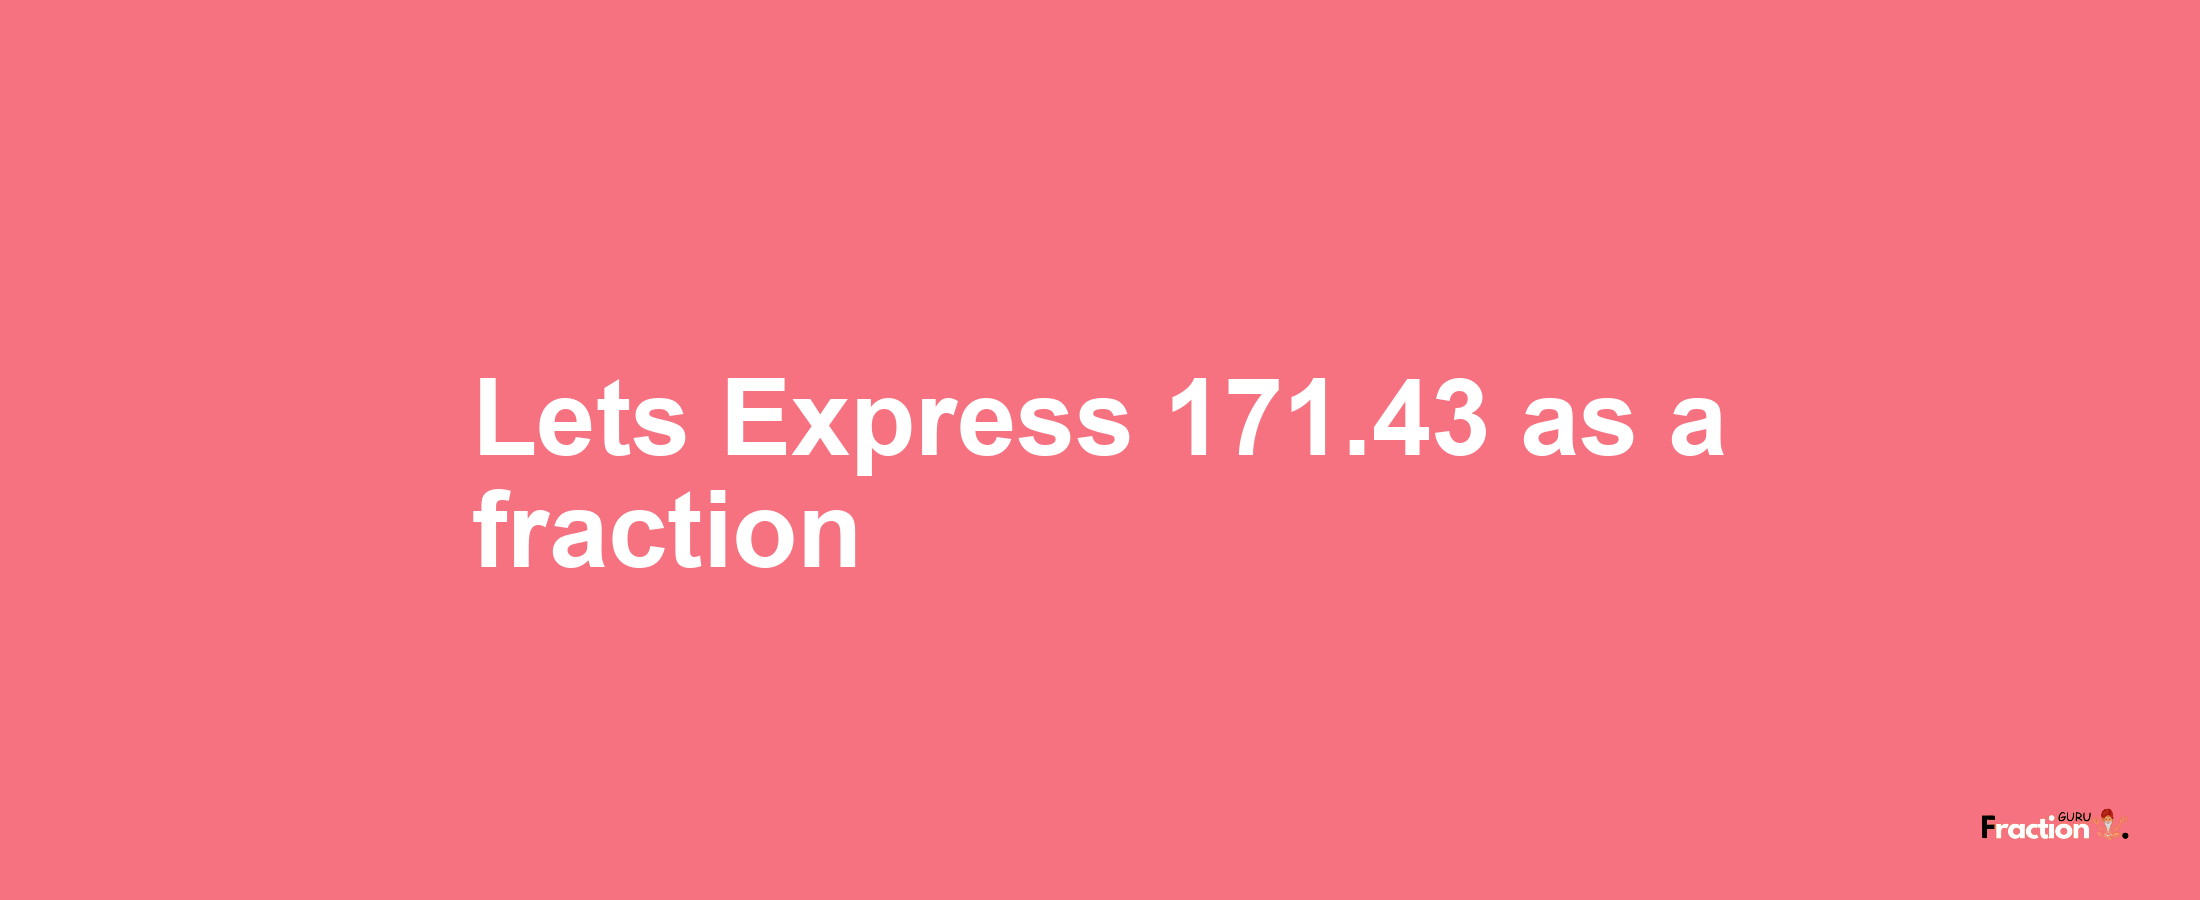 Lets Express 171.43 as afraction